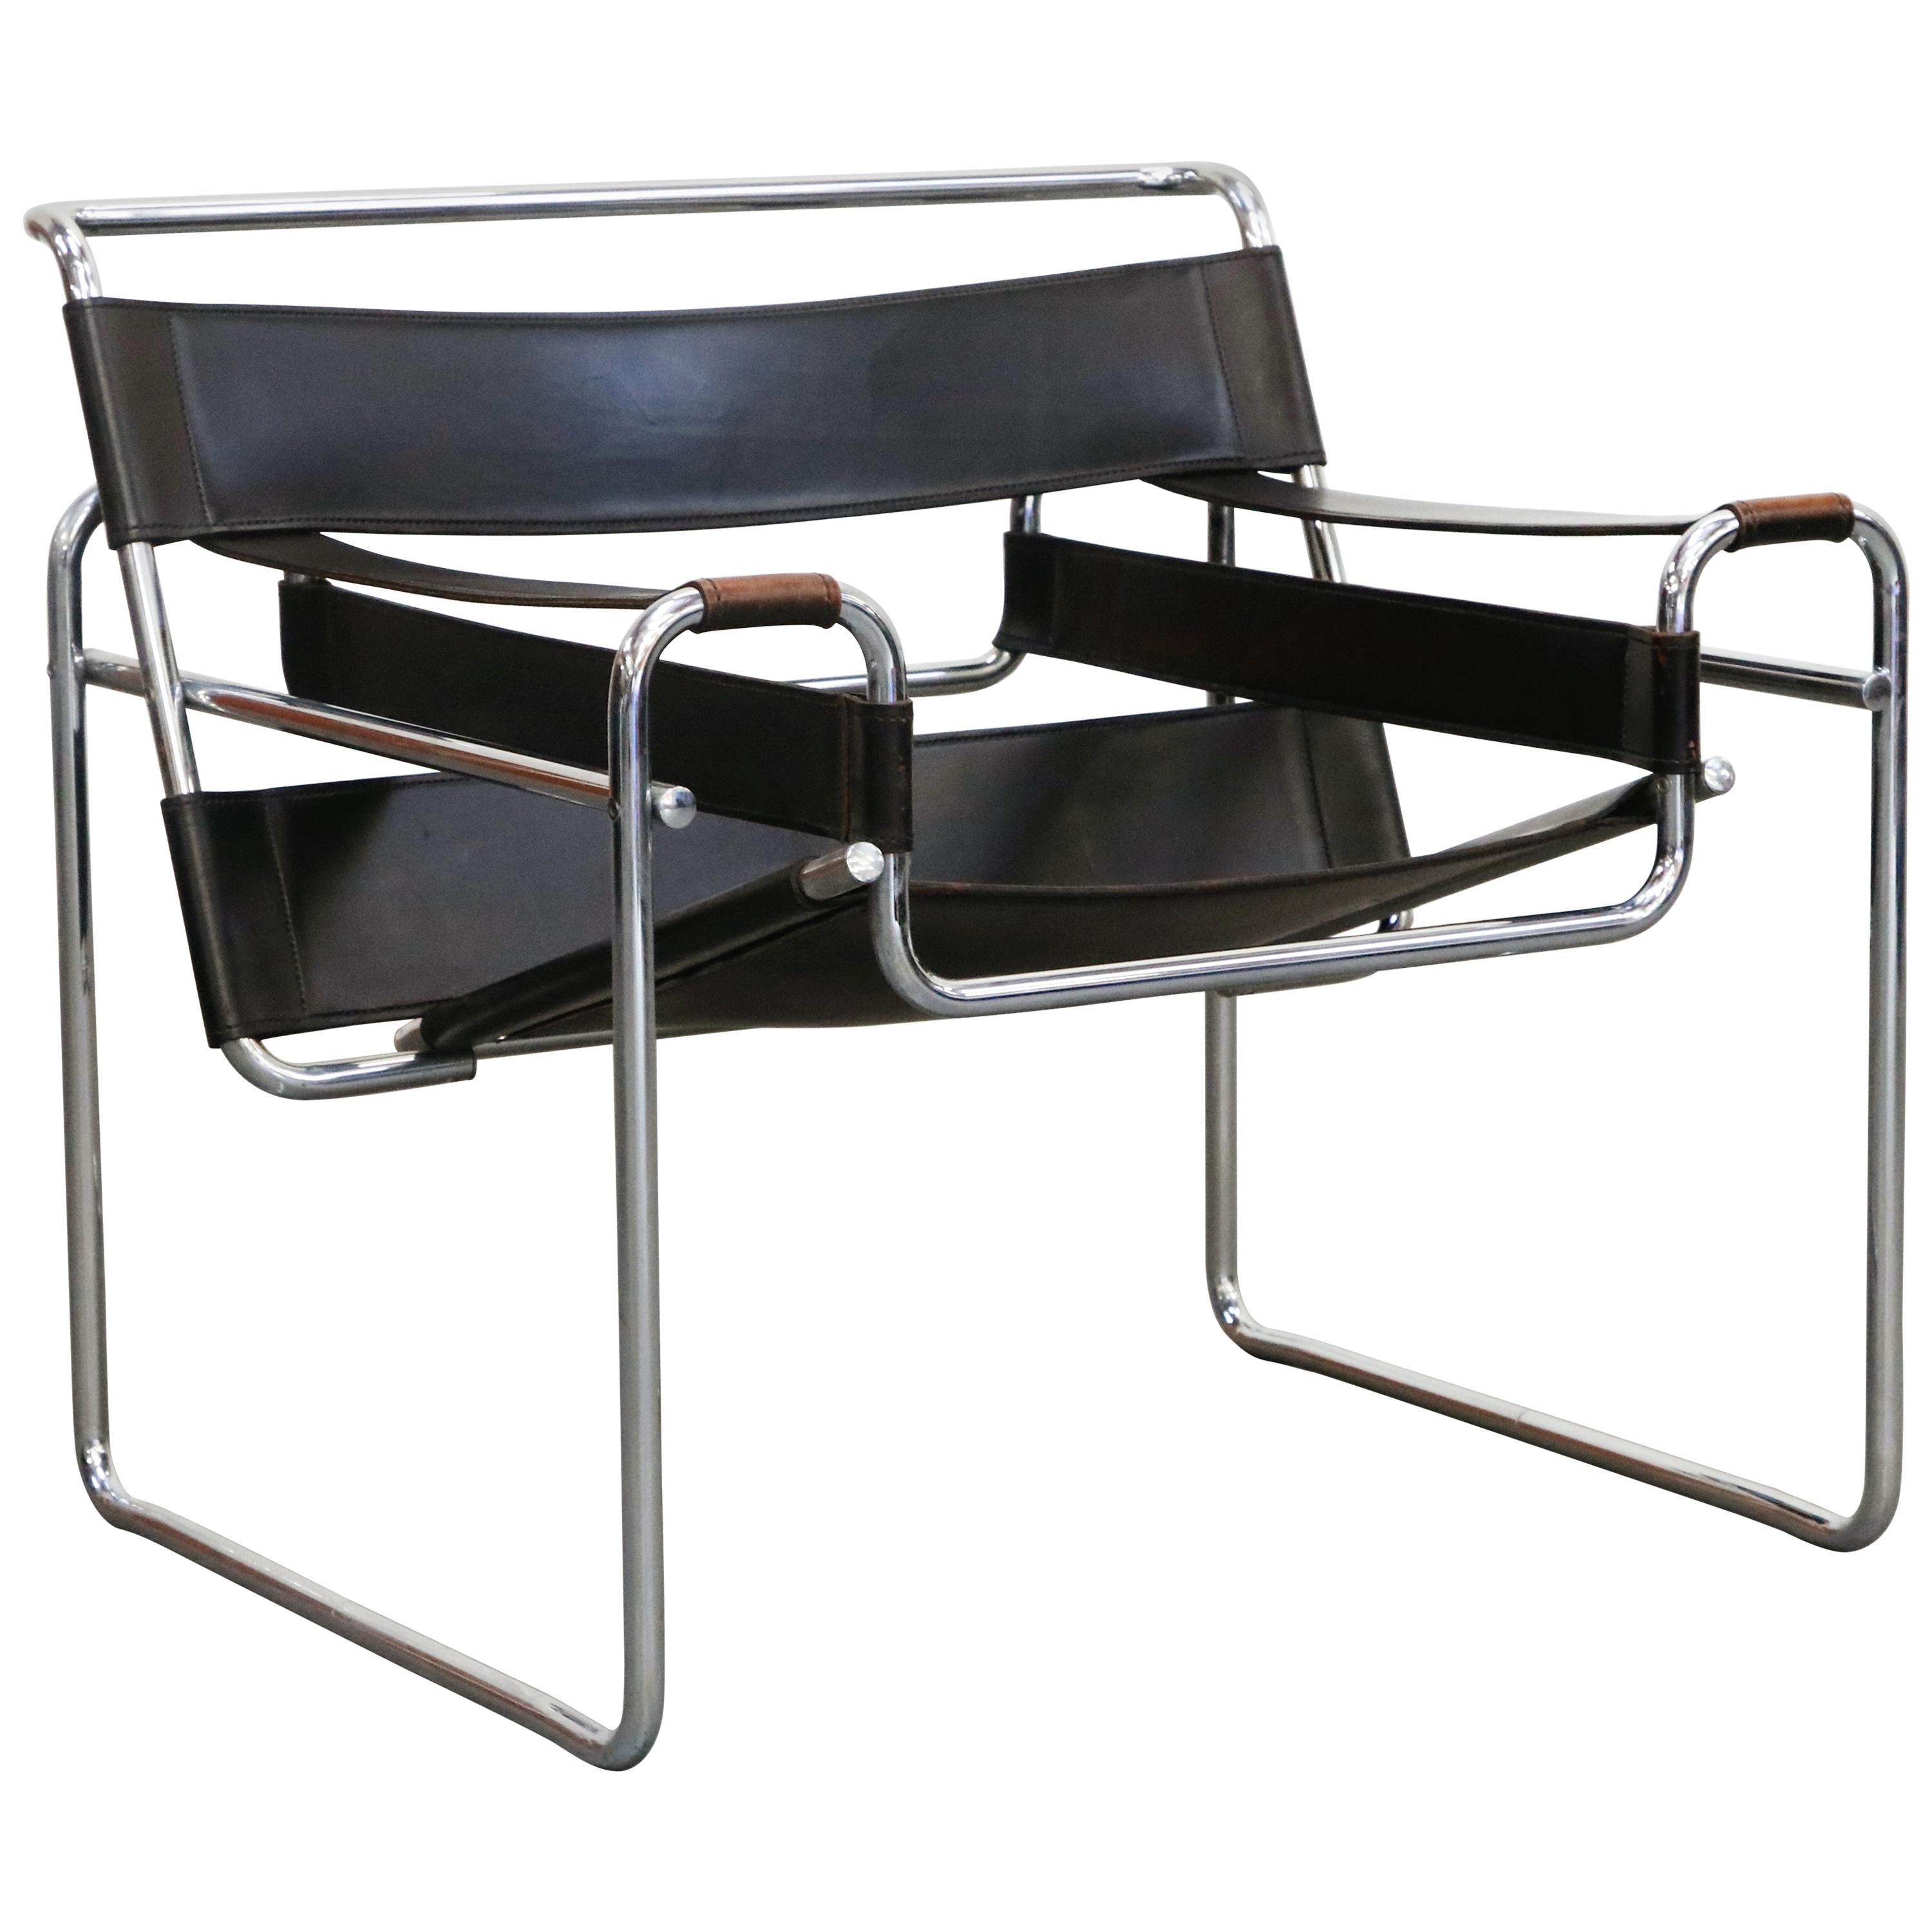 Marcel Breuer Wassily Styled Chrome And Black Leather Sling Chair C 1980 At 1stdibs